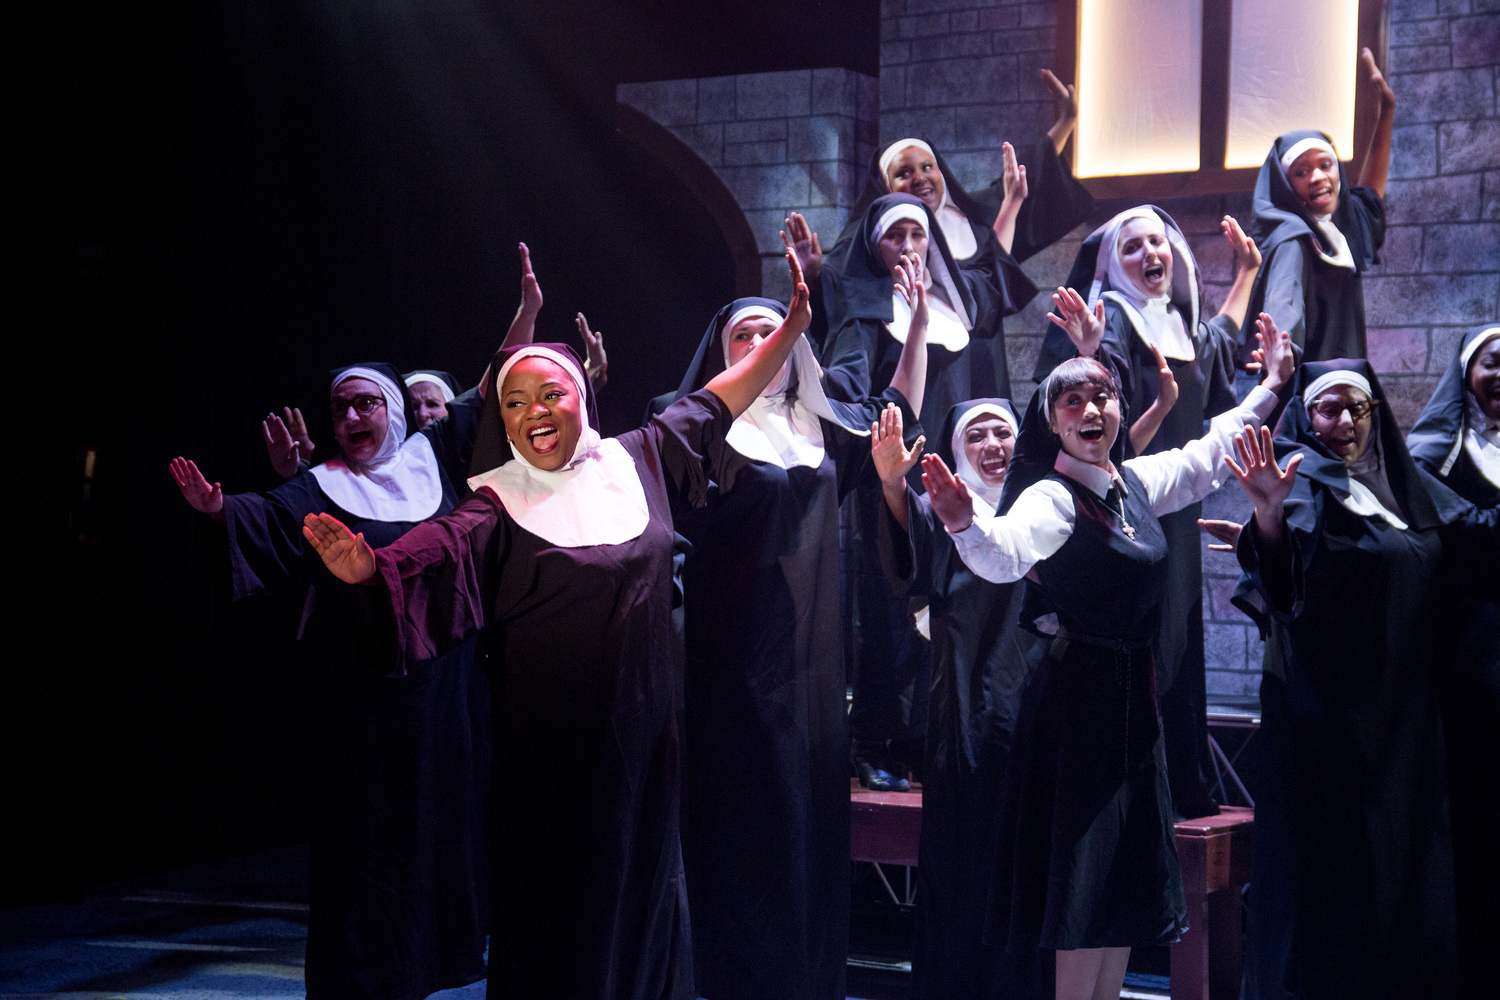 Sister Mary Clarence (Elizabeth Adabale - left) and company in SISTER ACT THE MUSICAL at the Simi Valley Cultural Arts Center through February 18. For ticket information: www.simi-arts.org or (805) 583-7900. 1